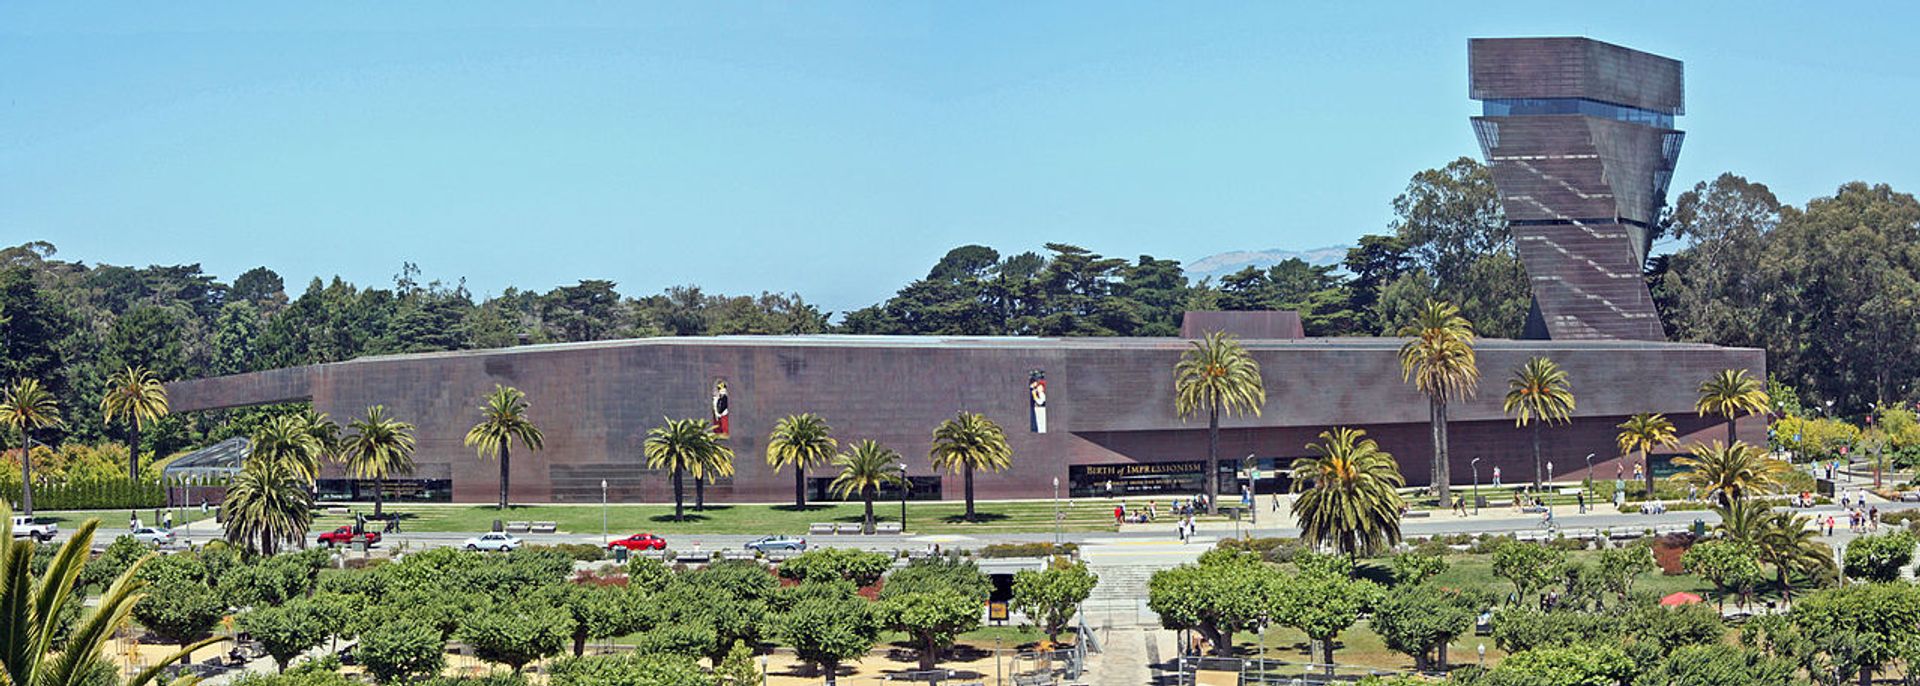 The de Young Museum in San Francisco is inviting Bay Area artists to submit their work for a juried exhibition WolfmanSF